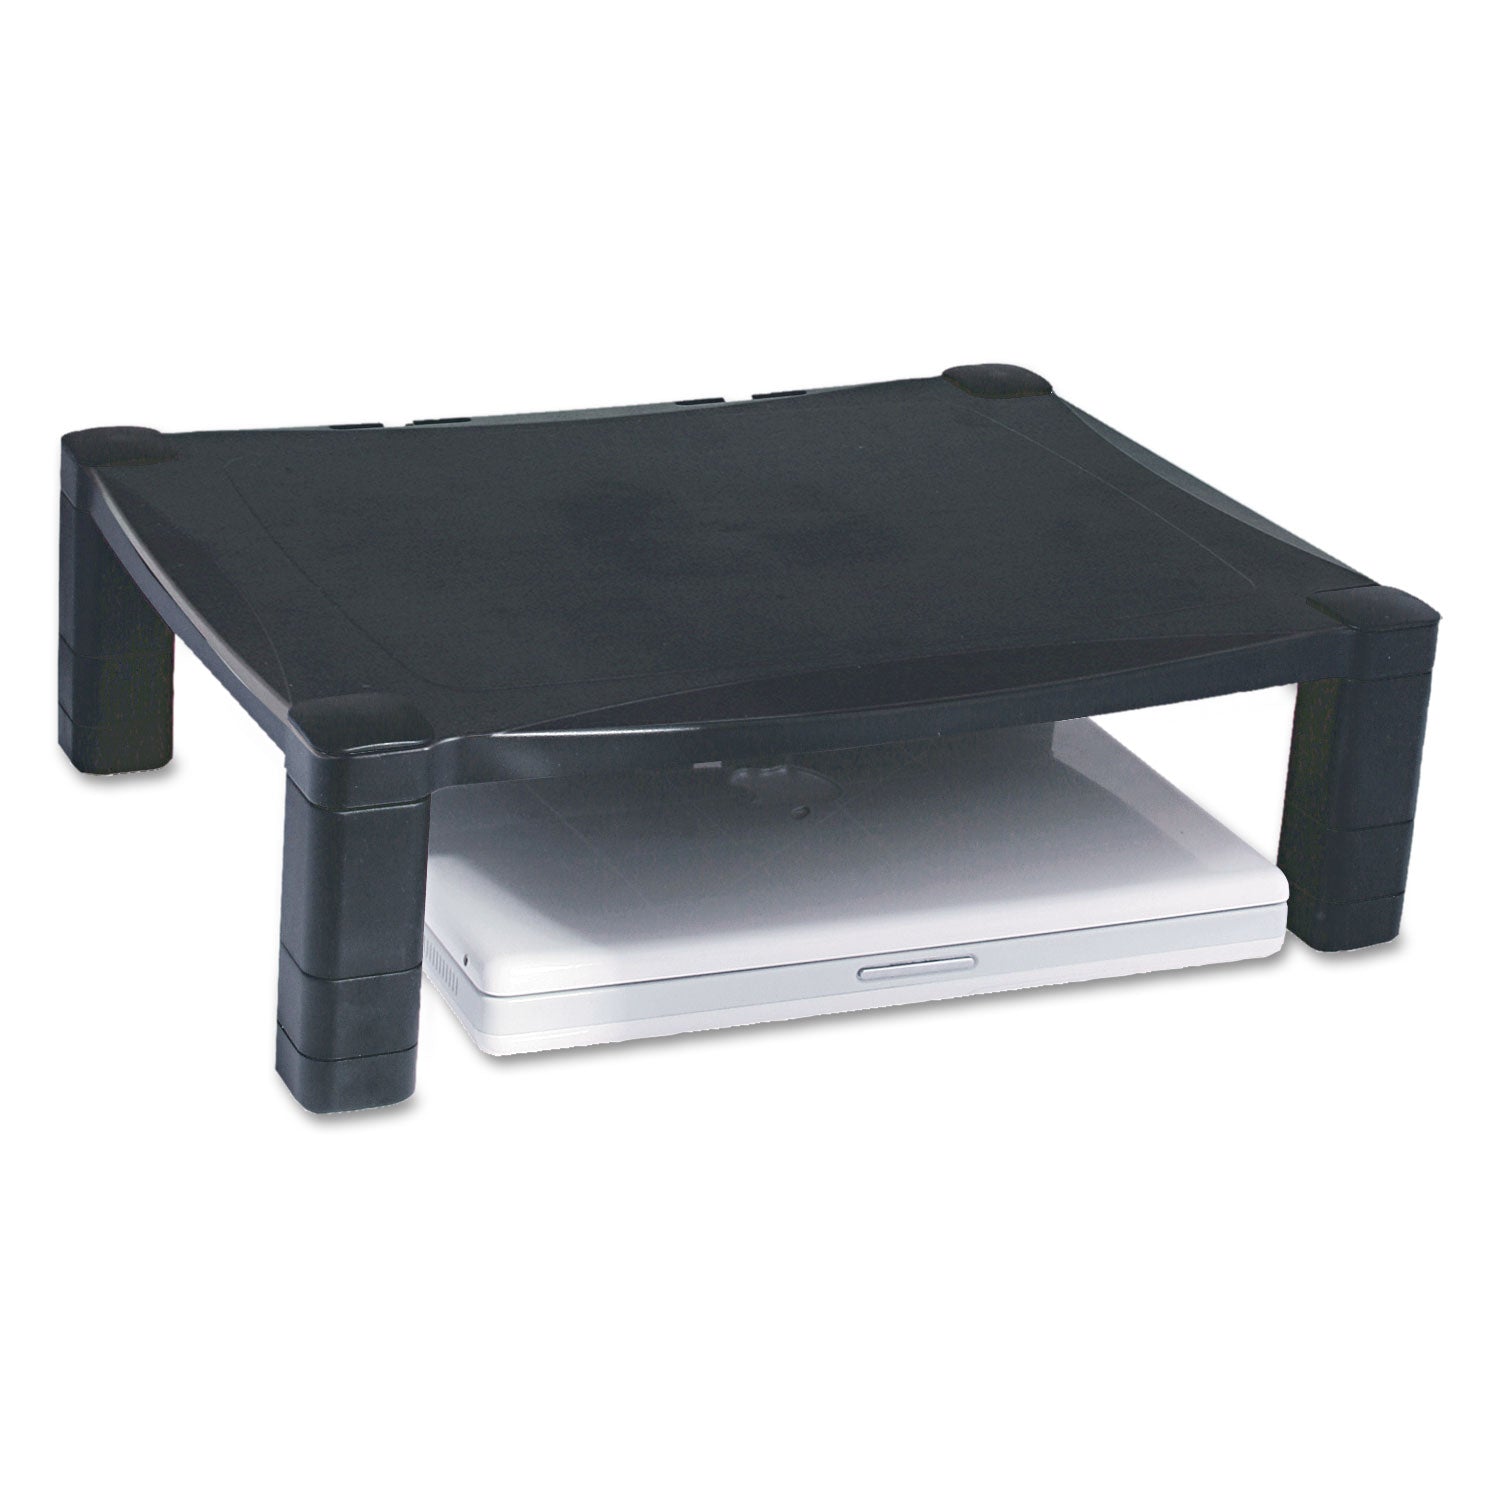 Single-Level Monitor Stand, 17" x 13.25" x 3" to 6.5", Black, Supports 50 lbs - 